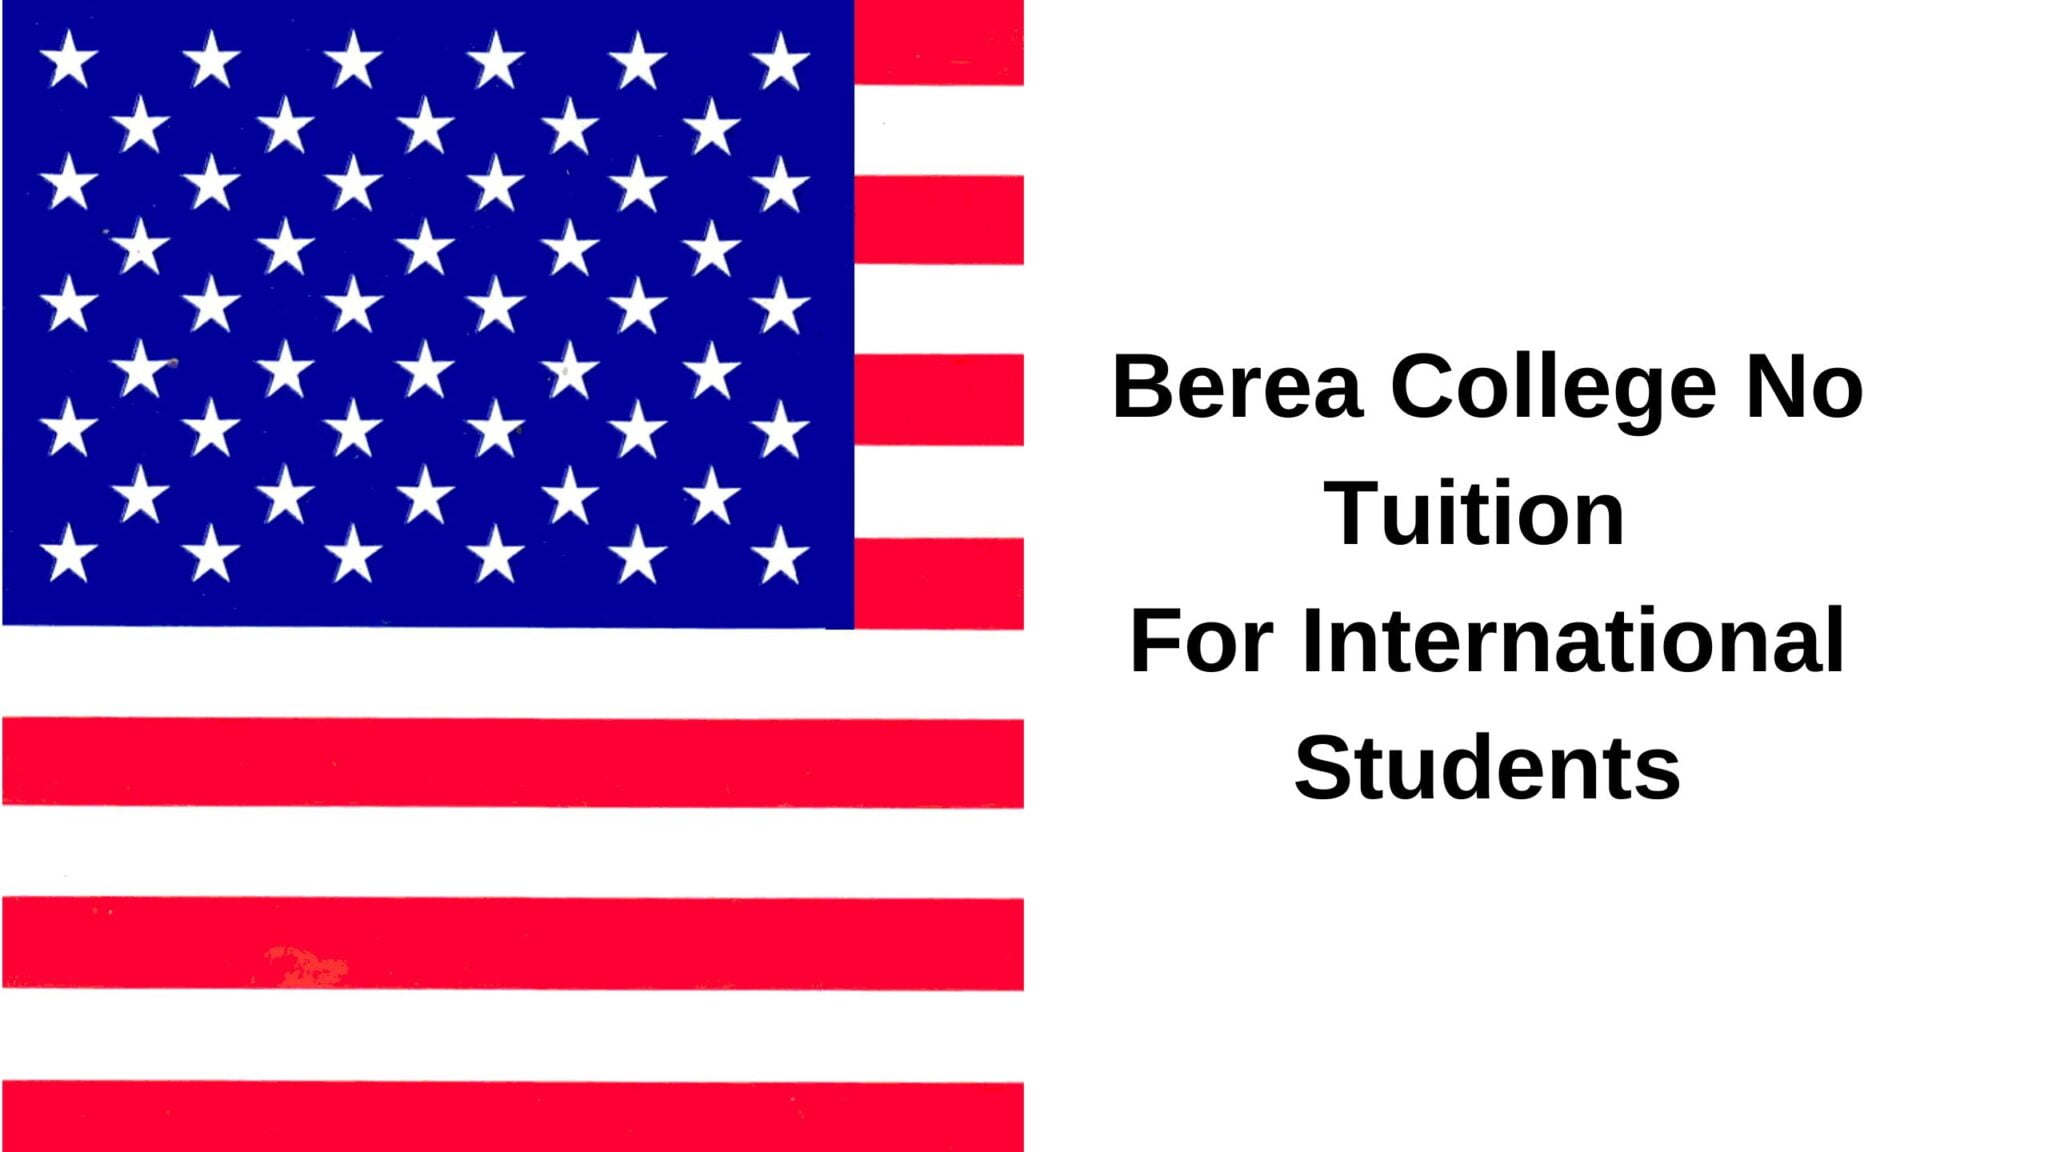 Berea College No Tuition For International Students. Apply Now